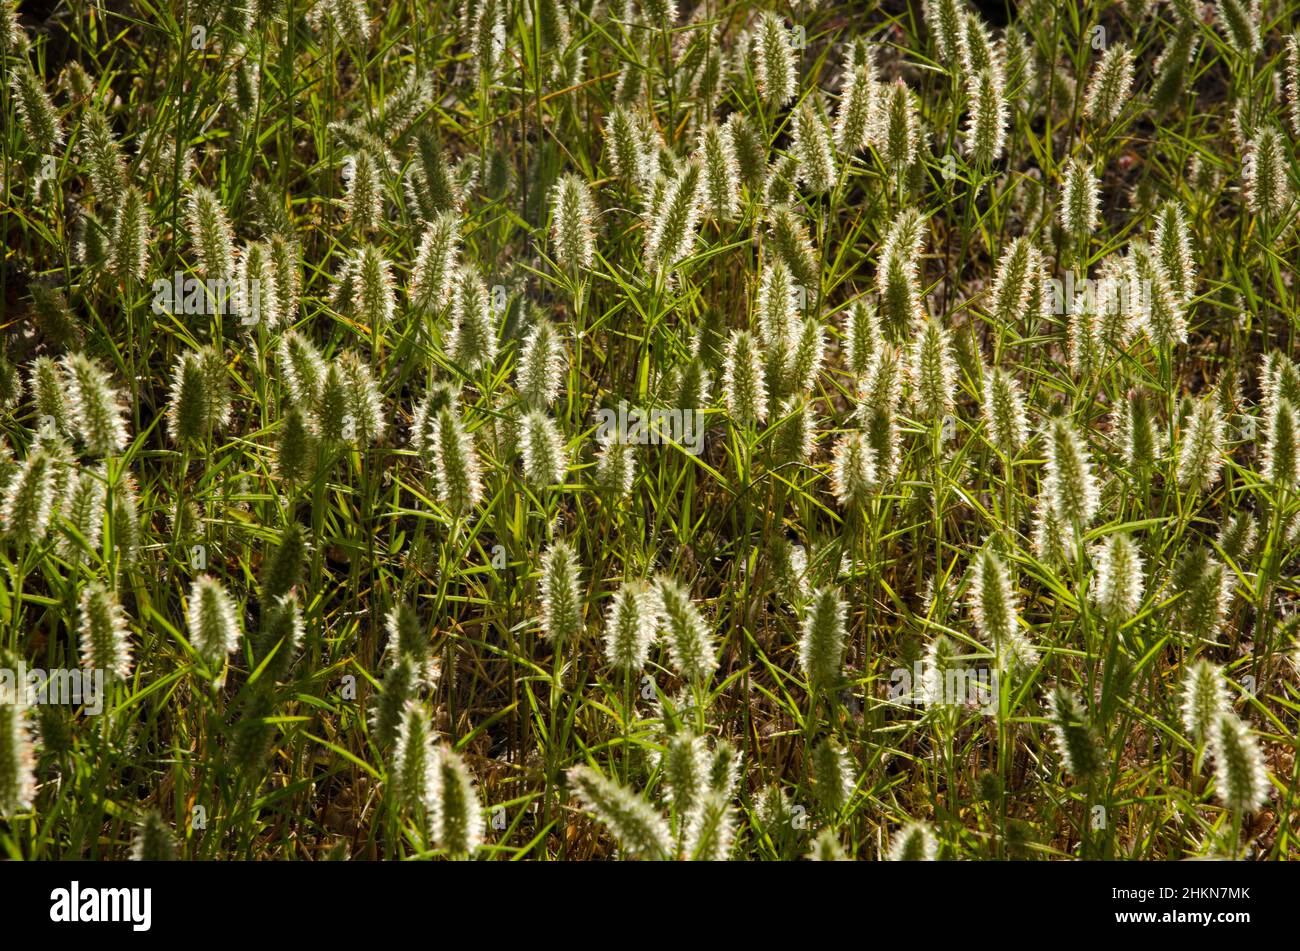 African foxtail grass Cenchrus ciliaris. Integral Natural Reserve of Inagua. Tejeda. Gran Canaria. Canary Islands. Spain. Stock Photo